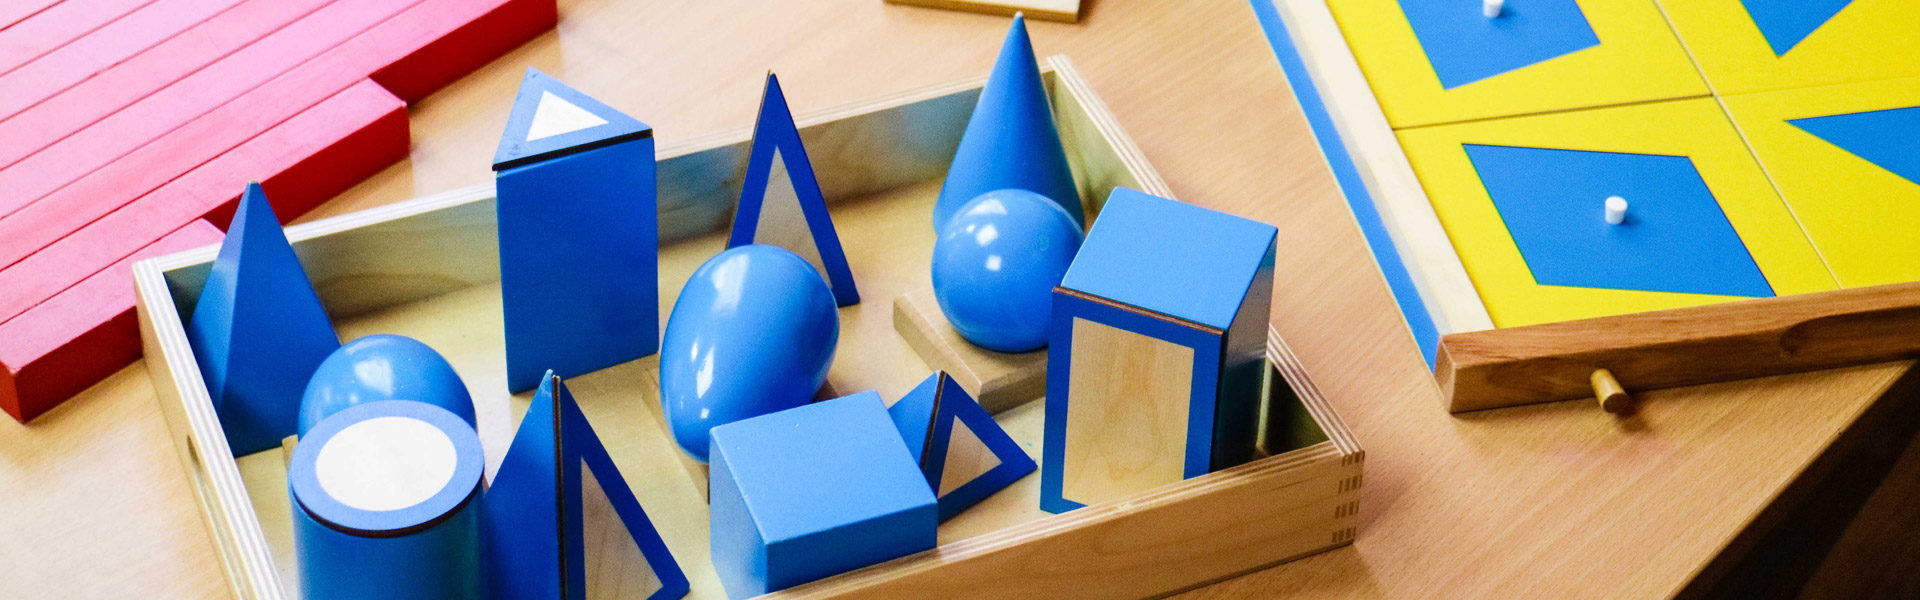 Montessori Preschool puzzles and educational products